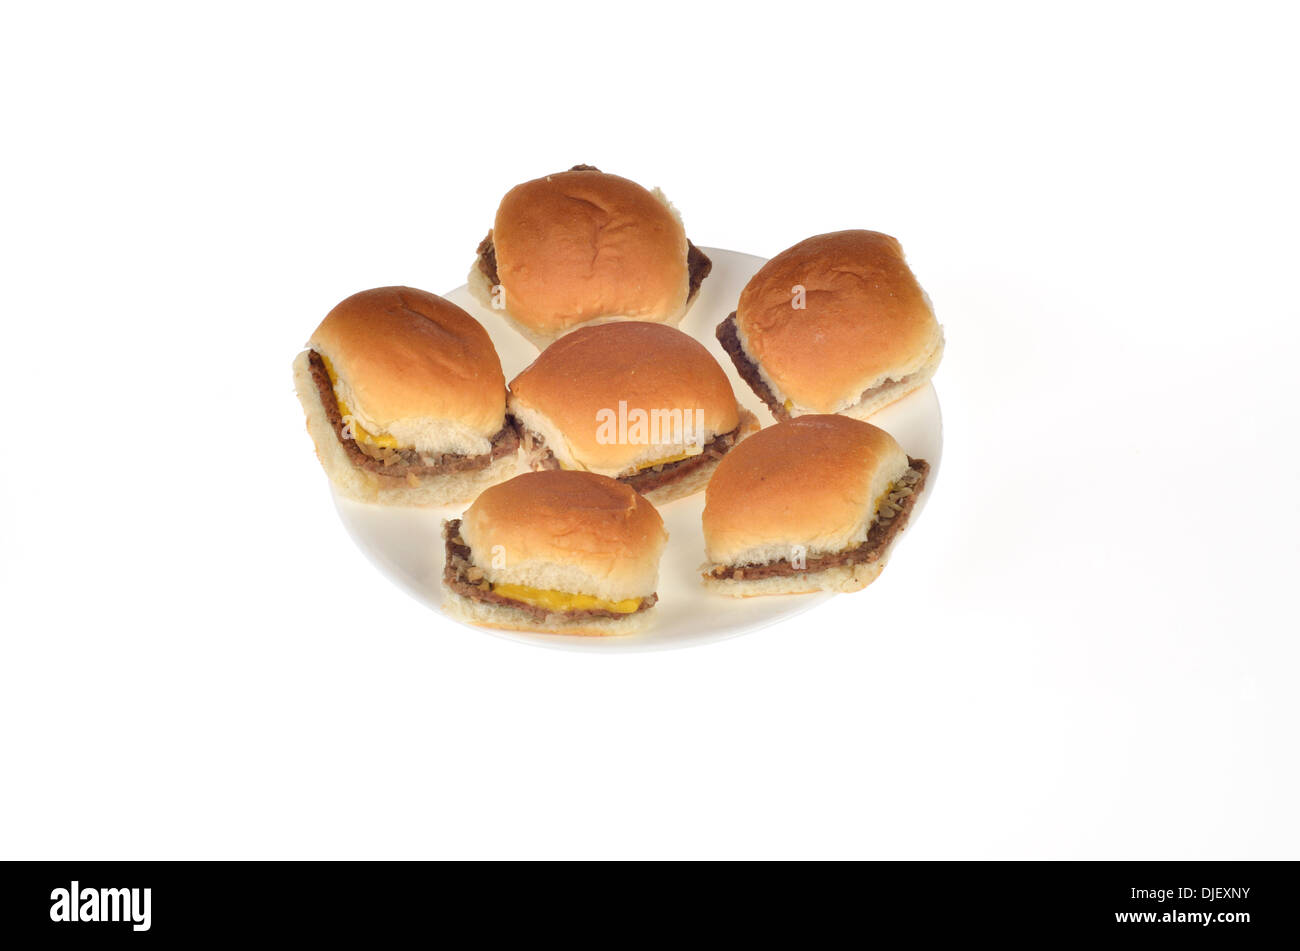 Plate of burger sliders with cheese Stock Photo